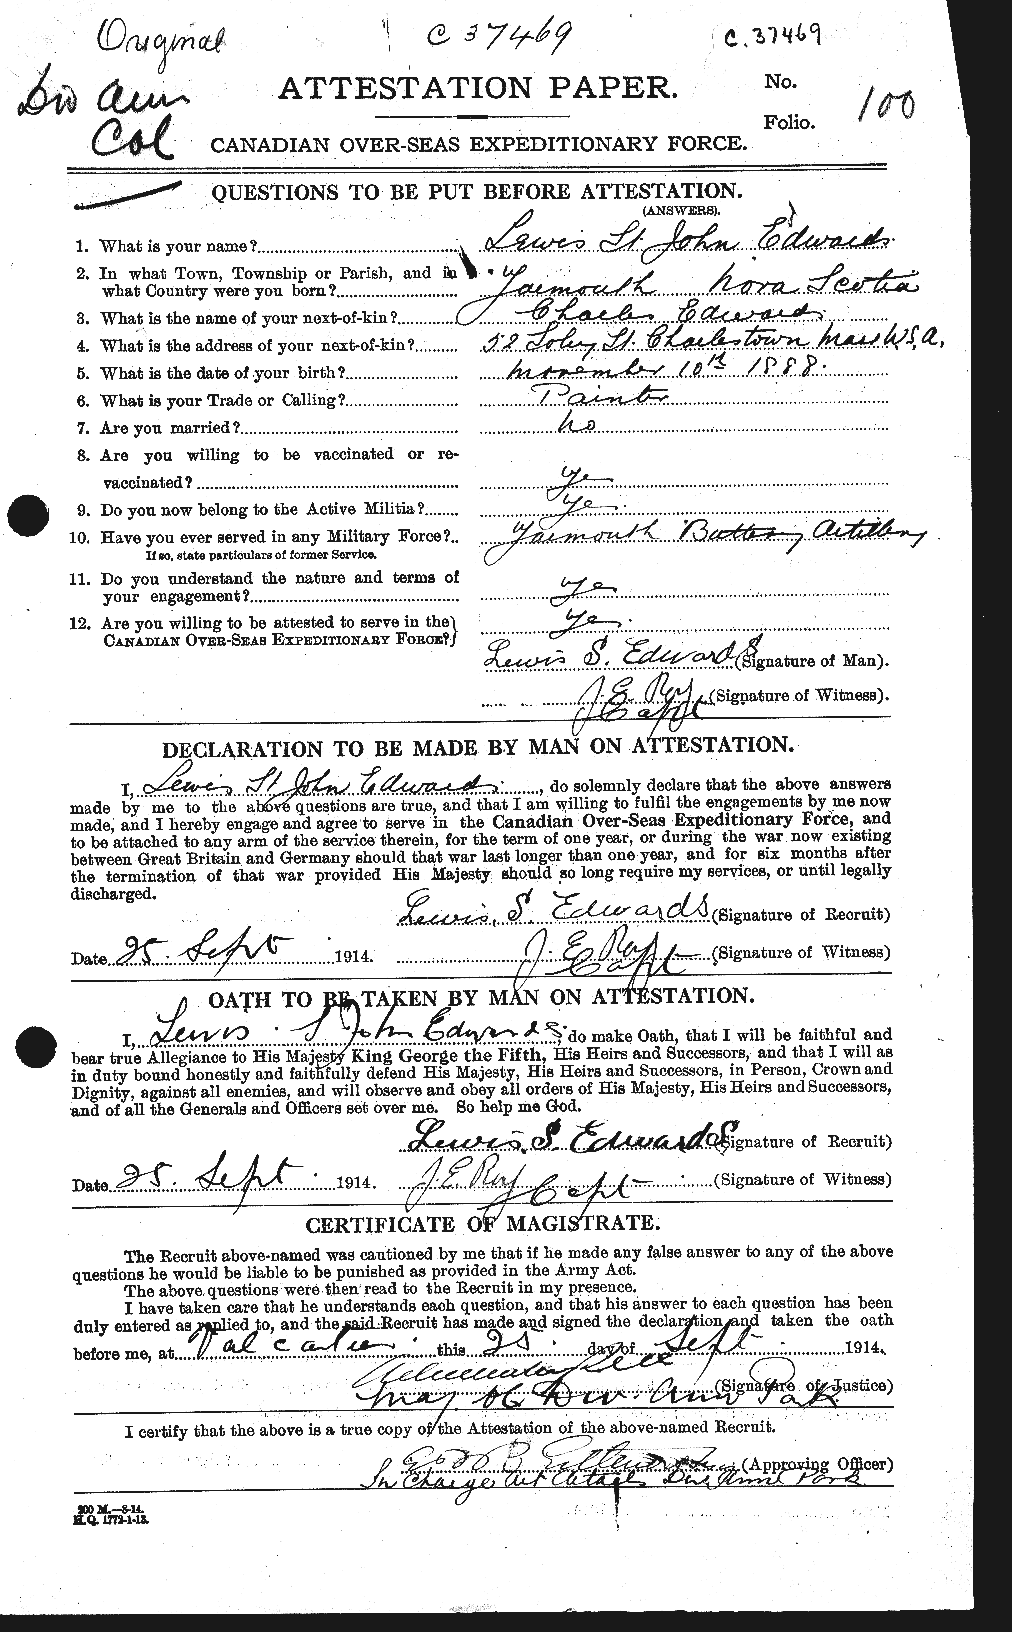 Personnel Records of the First World War - CEF 310203a